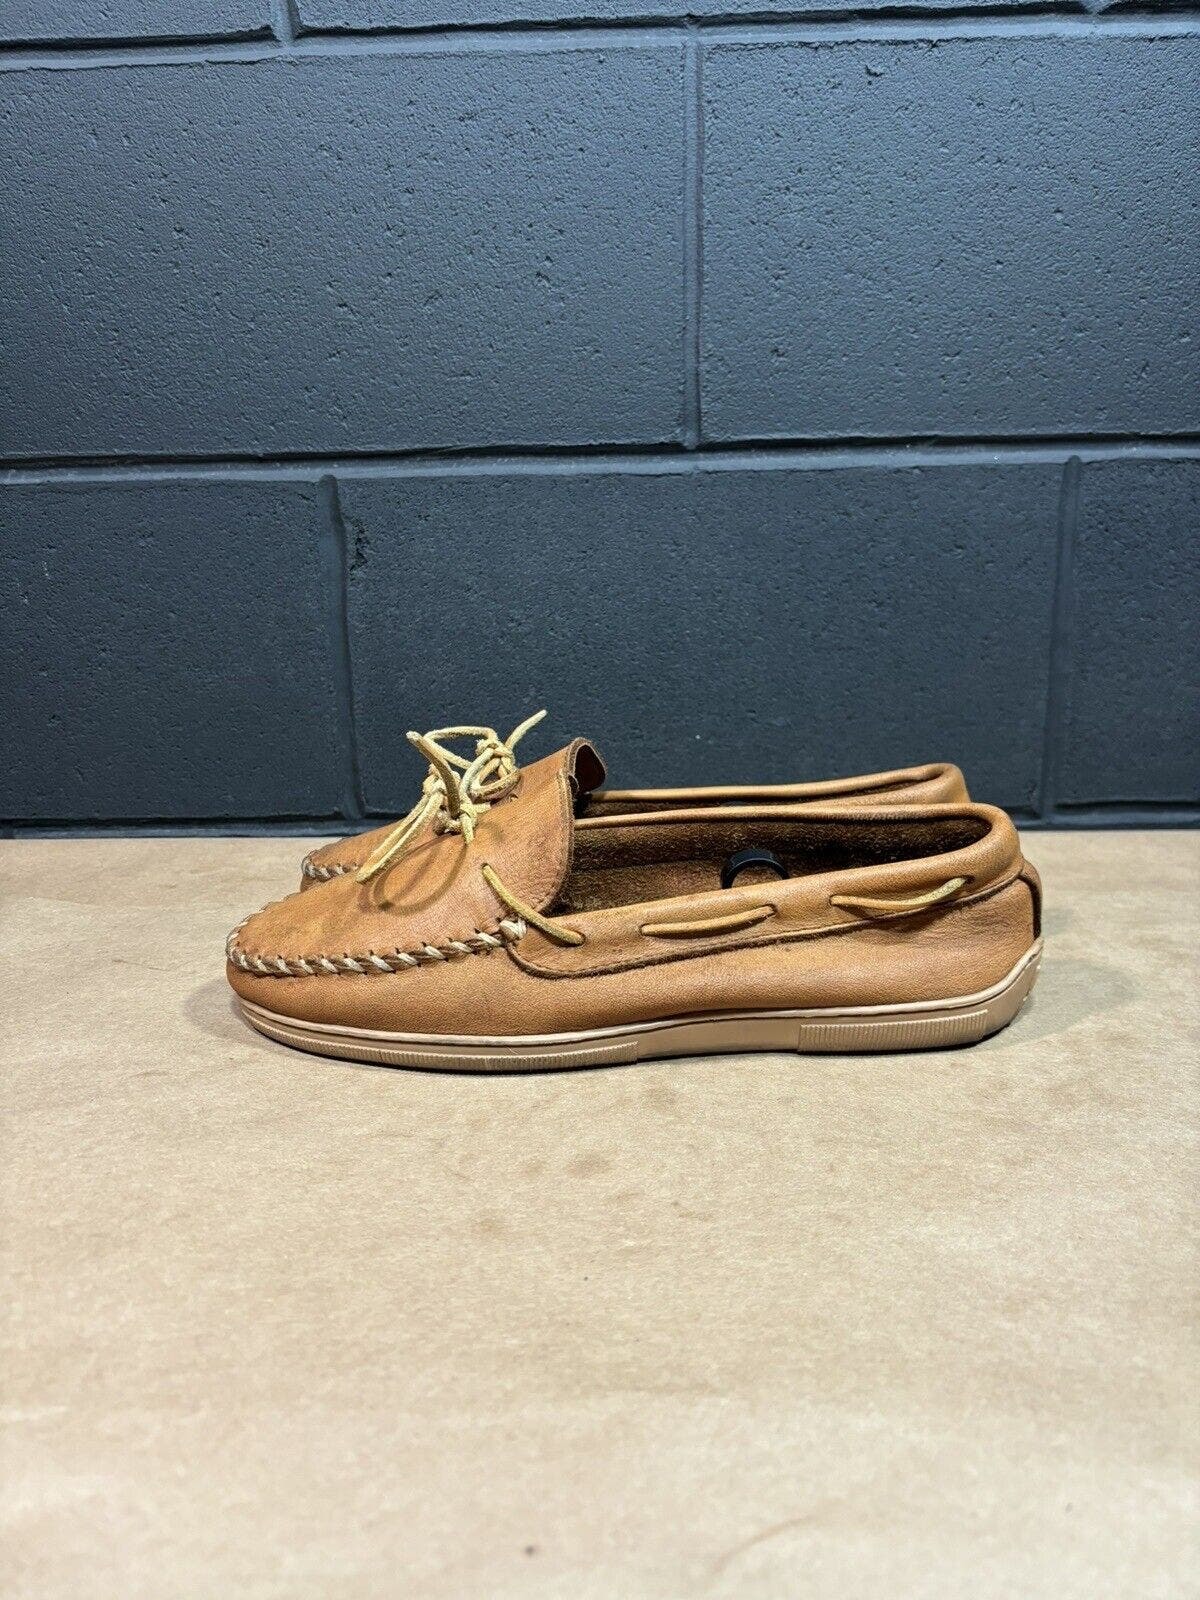 Primary image for Minnetonka Brown Leather Moccasins Men’s Sz 12